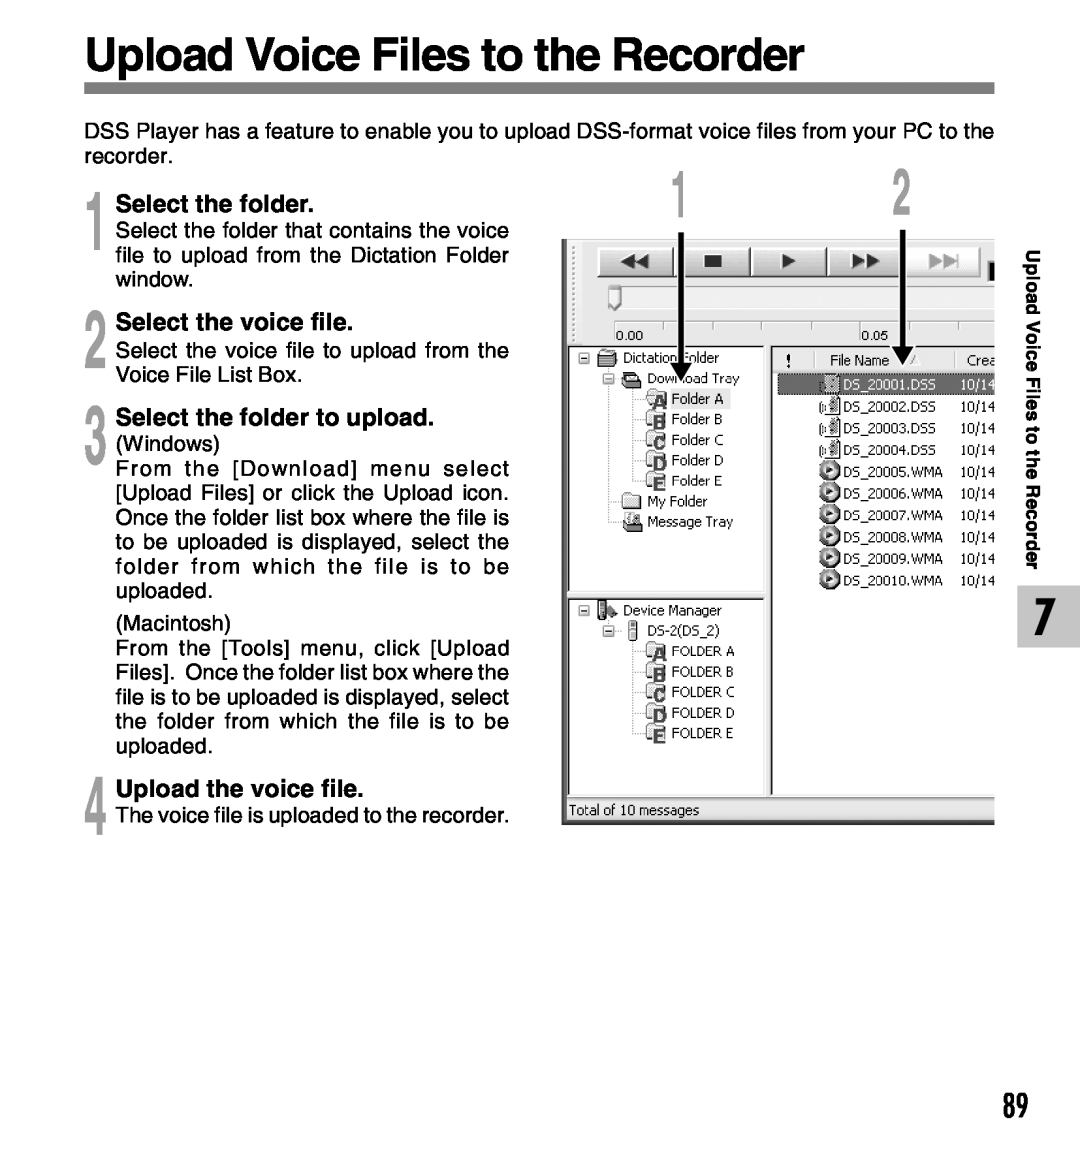 Olympus 2 Upload Voice Files to the Recorder, Select the folder to upload, Upload the voice file, Select the voice file 